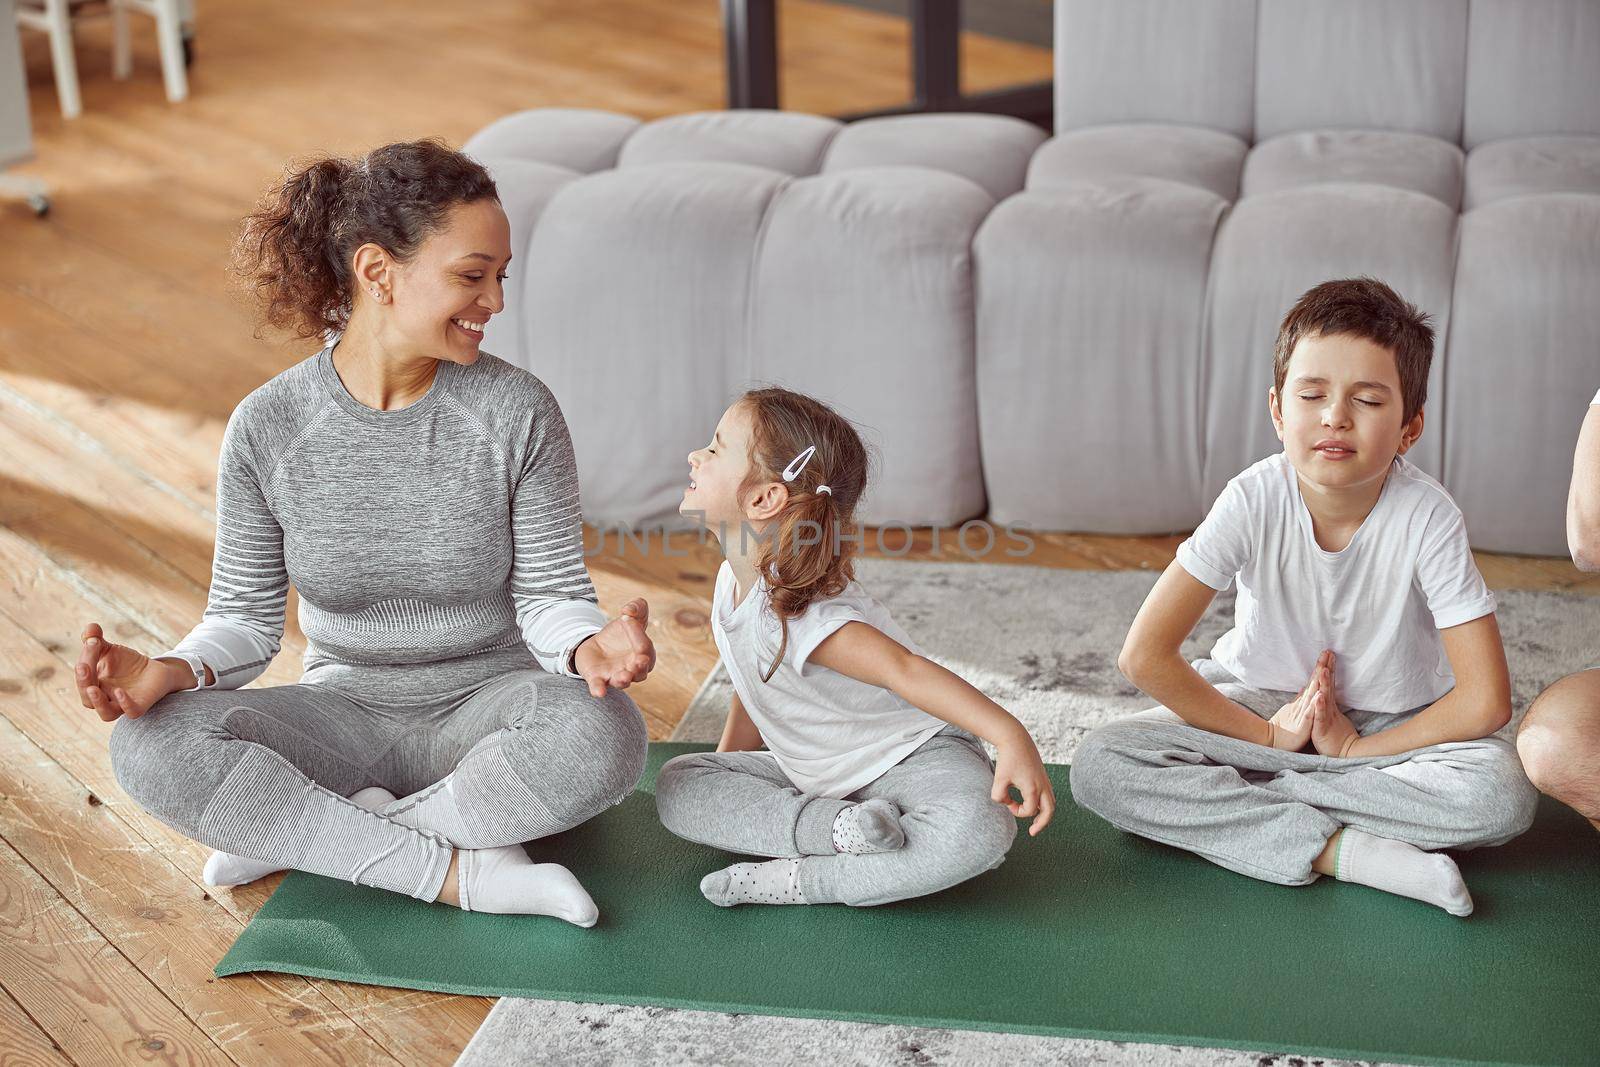 Top view of cheerful girl having fun with mom while boy is doing meditation with father